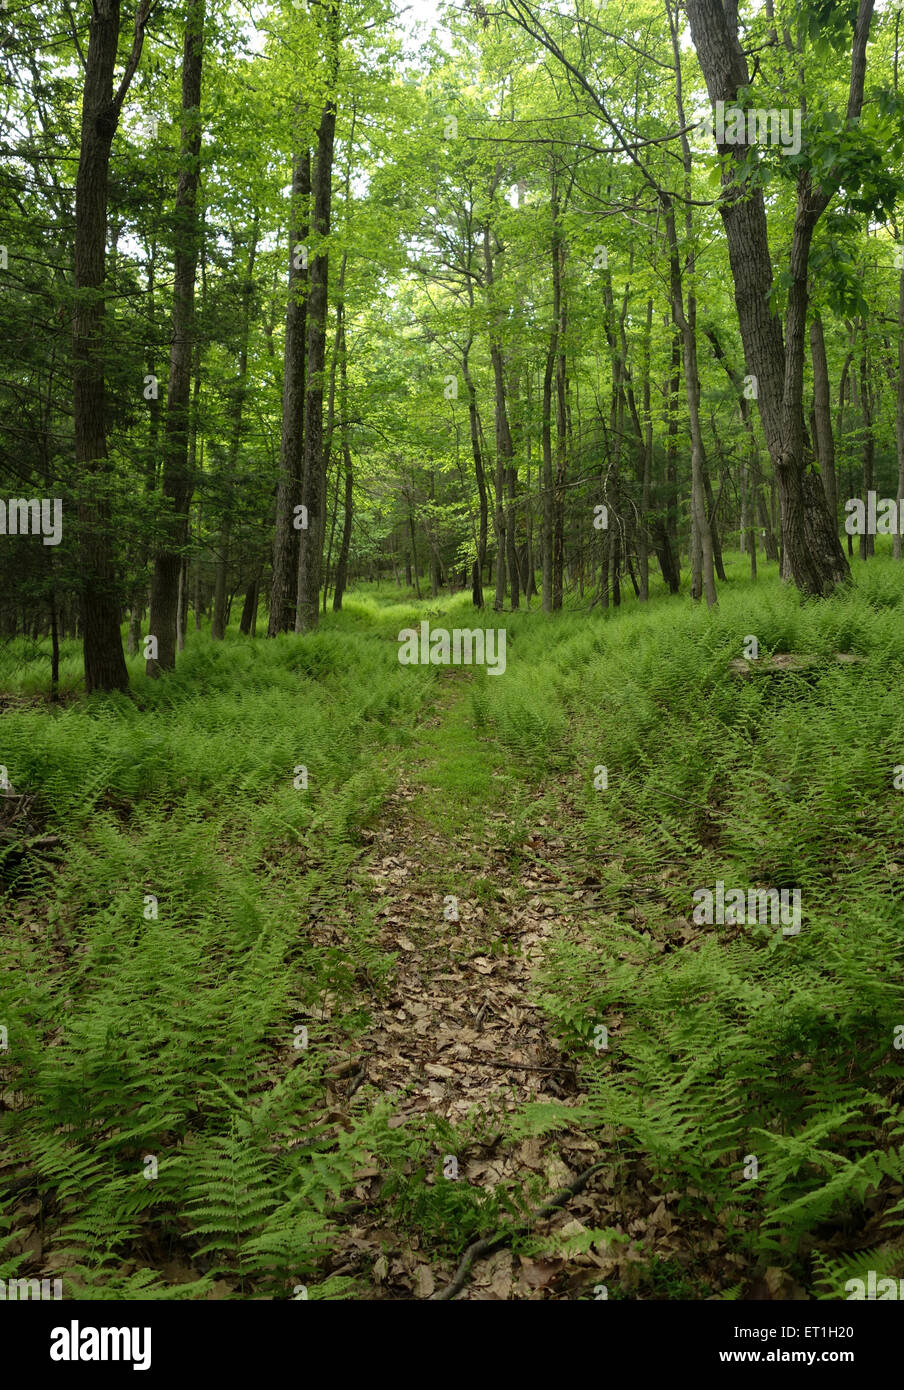 Path overgrown by Ferns, Dennstaedtia punctilobula, Hay-scented Fern, covering forest floor in spring, Pennsylvania. USA. Stock Photo